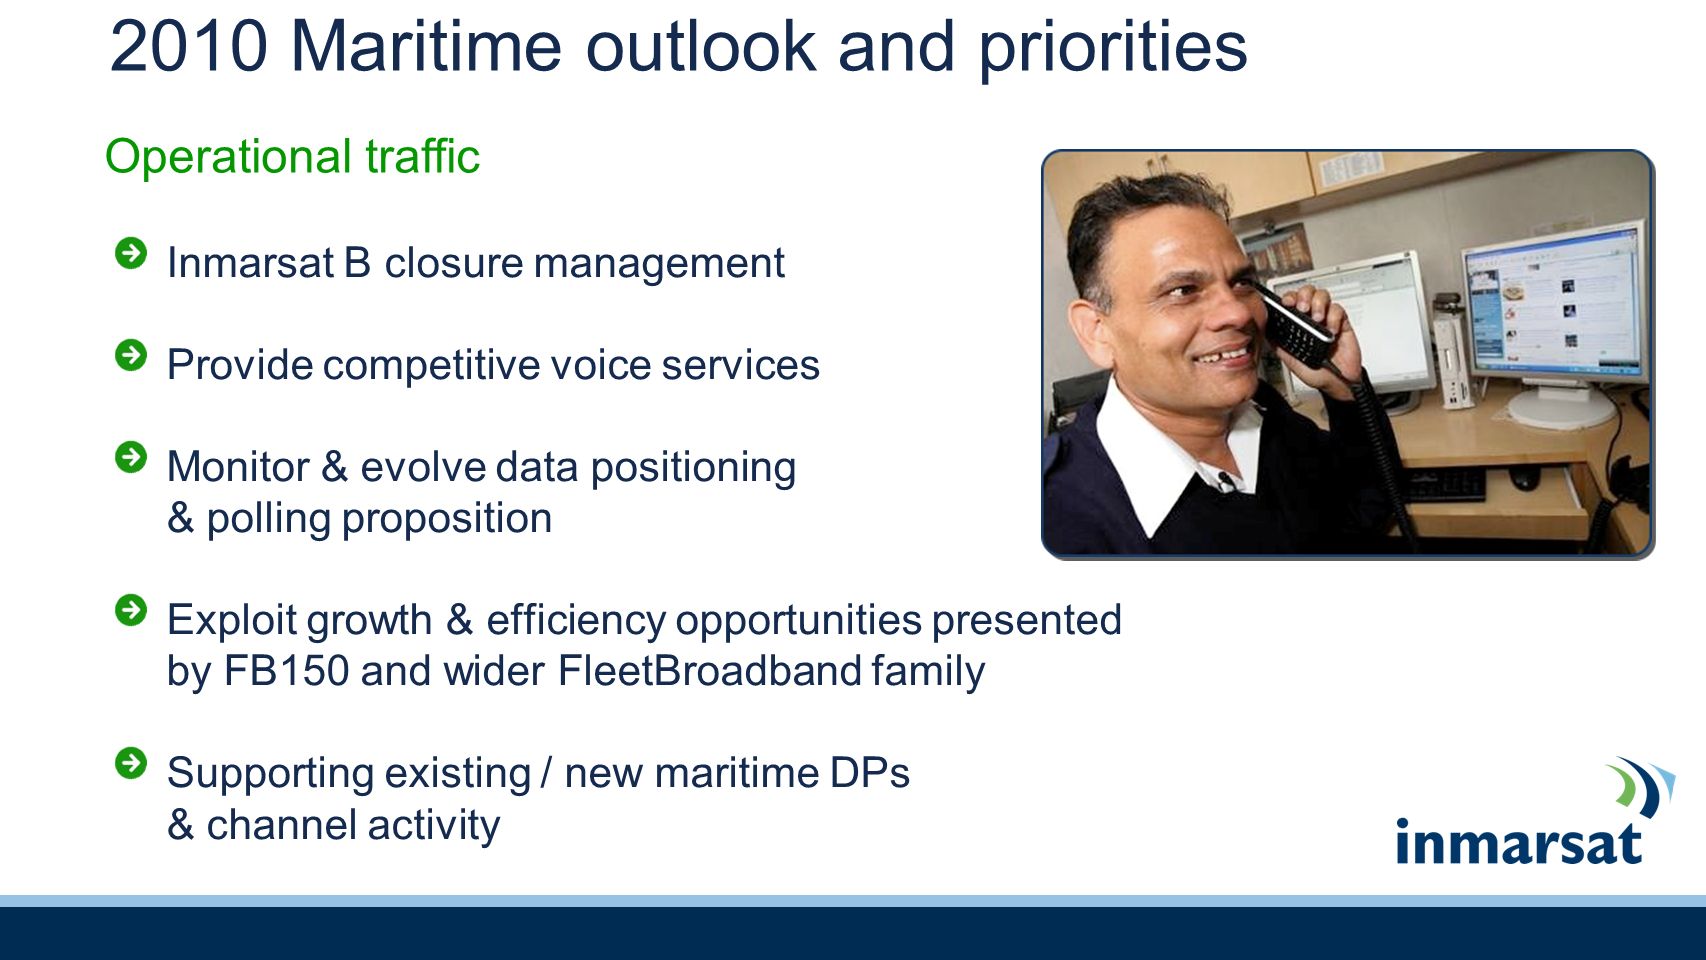 2010 Maritime outlook and priorities Inmarsat B closure management Provide competitive voice services Monitor & evolve data positioning & polling proposition Exploit growth & efficiency opportunities presented by FB150 and wider FleetBroadband family Supporting existing / new maritime DPs & channel activity Operational traffic